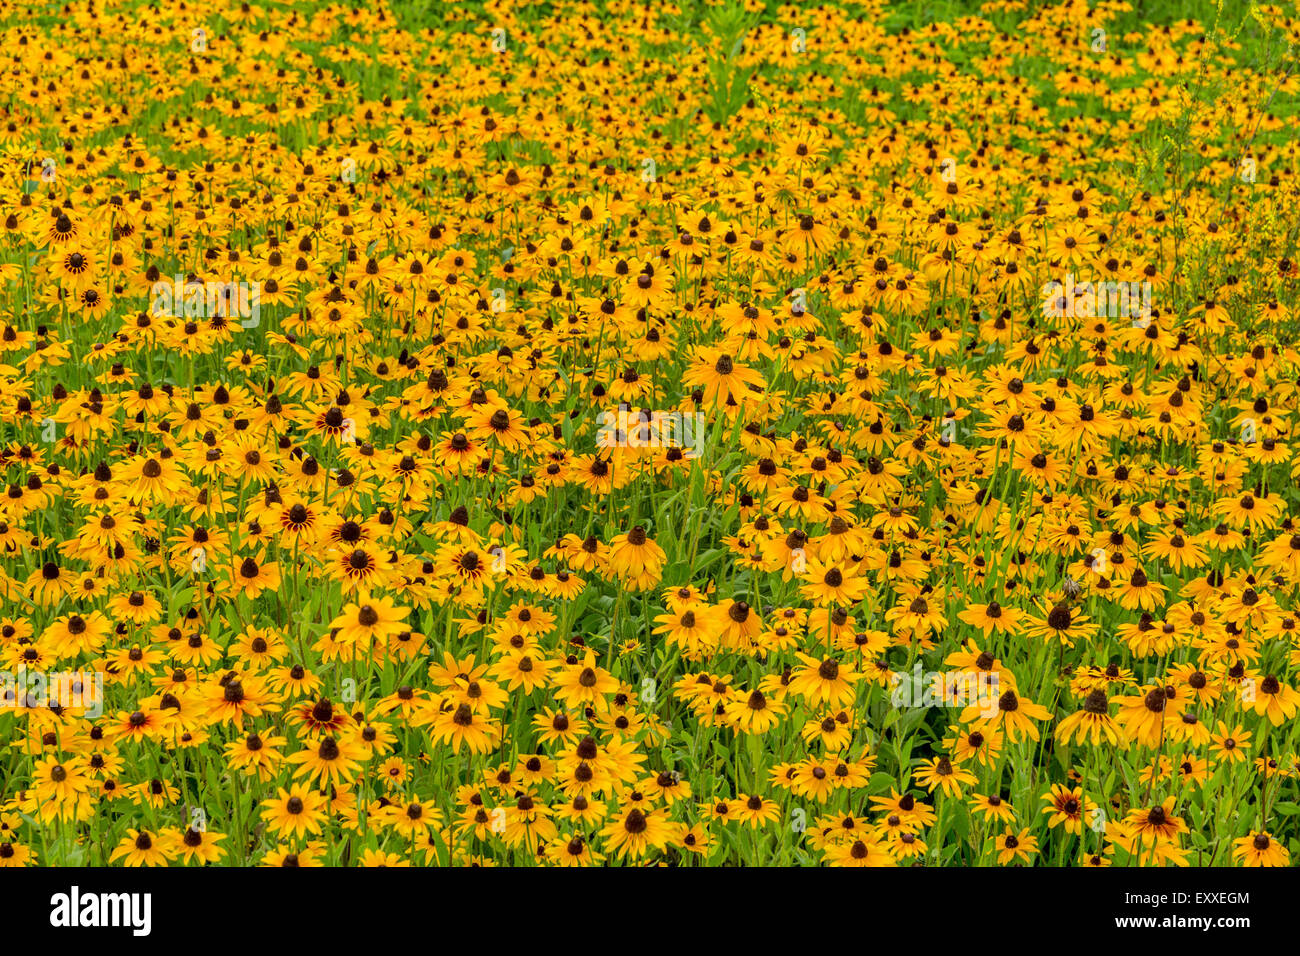 Images taken of an early summer field of the wild Black-Eyed-Susan flowers found in Downingtown, Chester County PA. Stock Photo